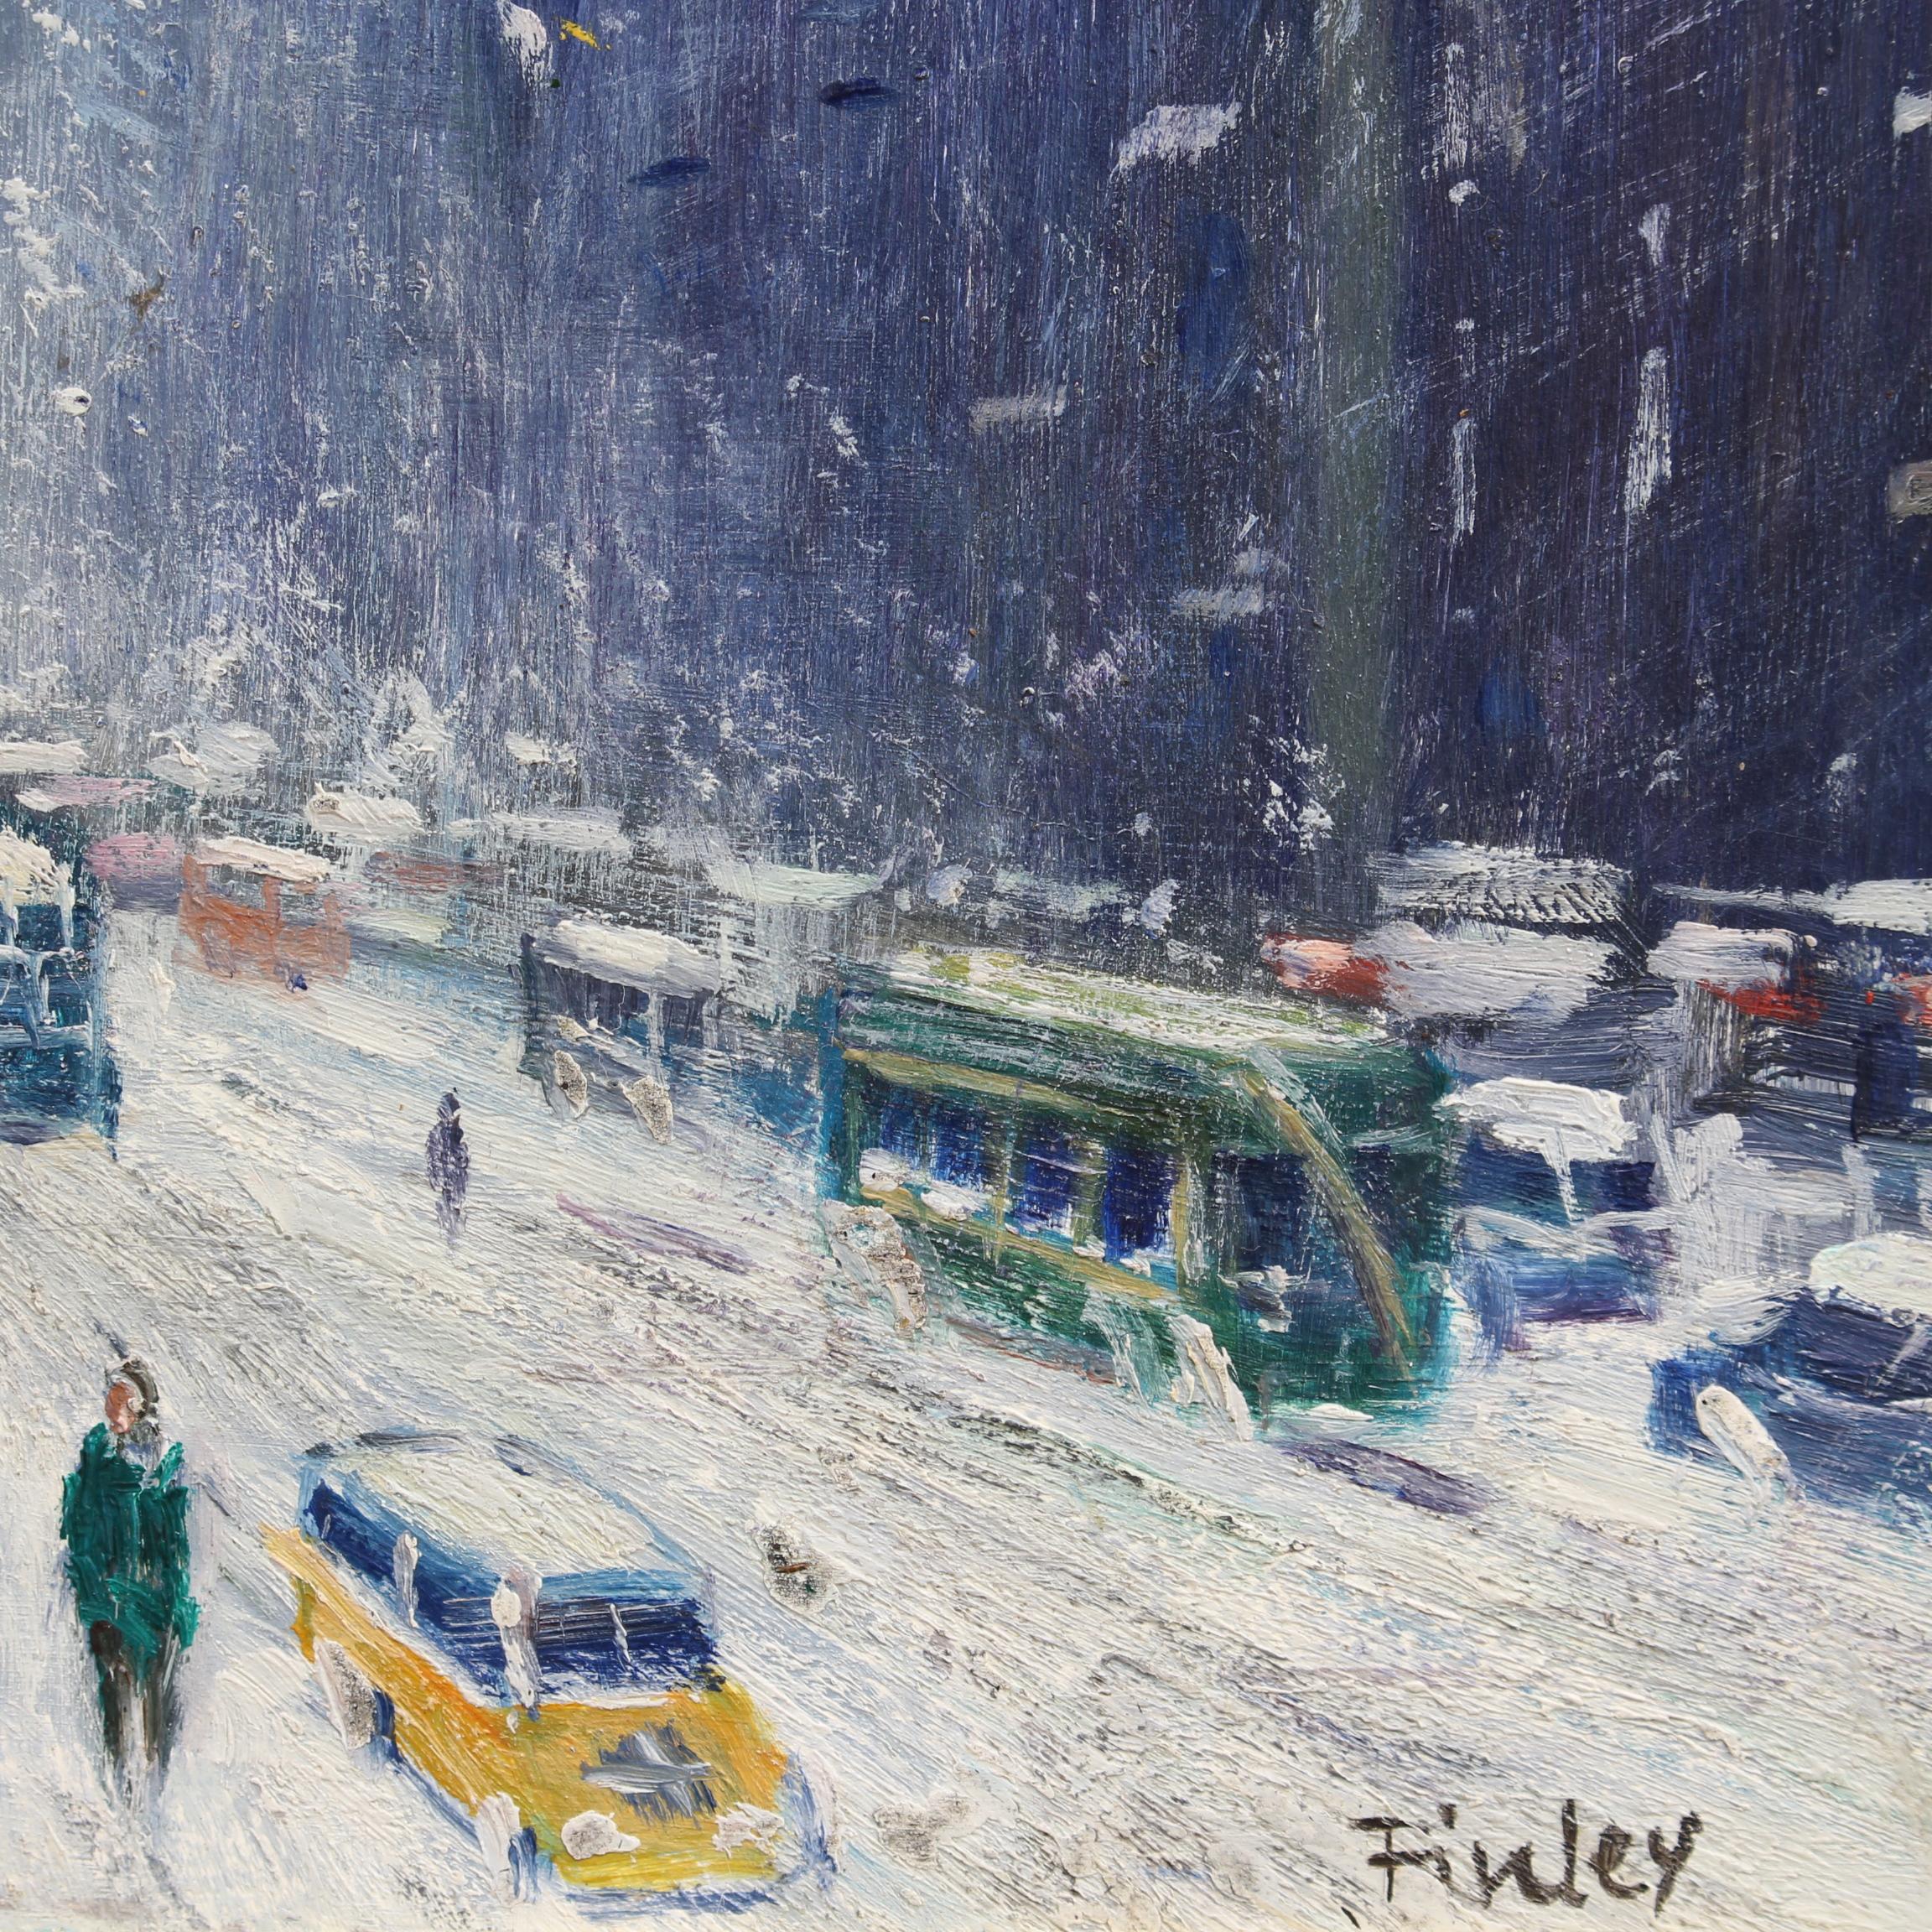 'New York Public Library Under Snow 1940s' by Finley 6